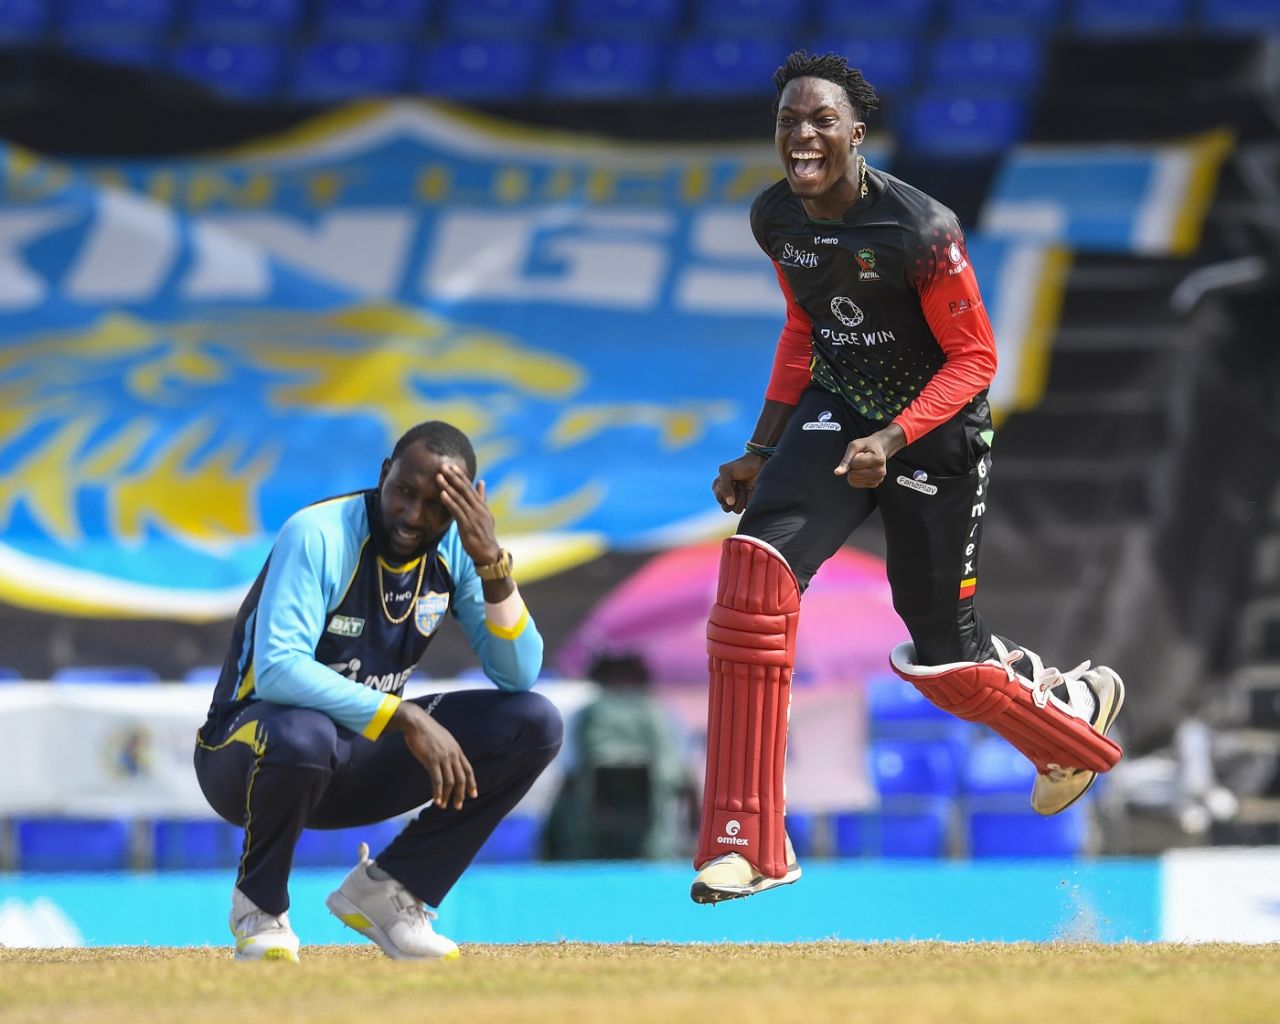 Dominic Drakes is ecstatic after hitting the winning run off Kesrick Williams, St Lucia Kings vs St Kitts and Nevis Patriots, CPL 2021, final, Basseterre, September 15, 2021